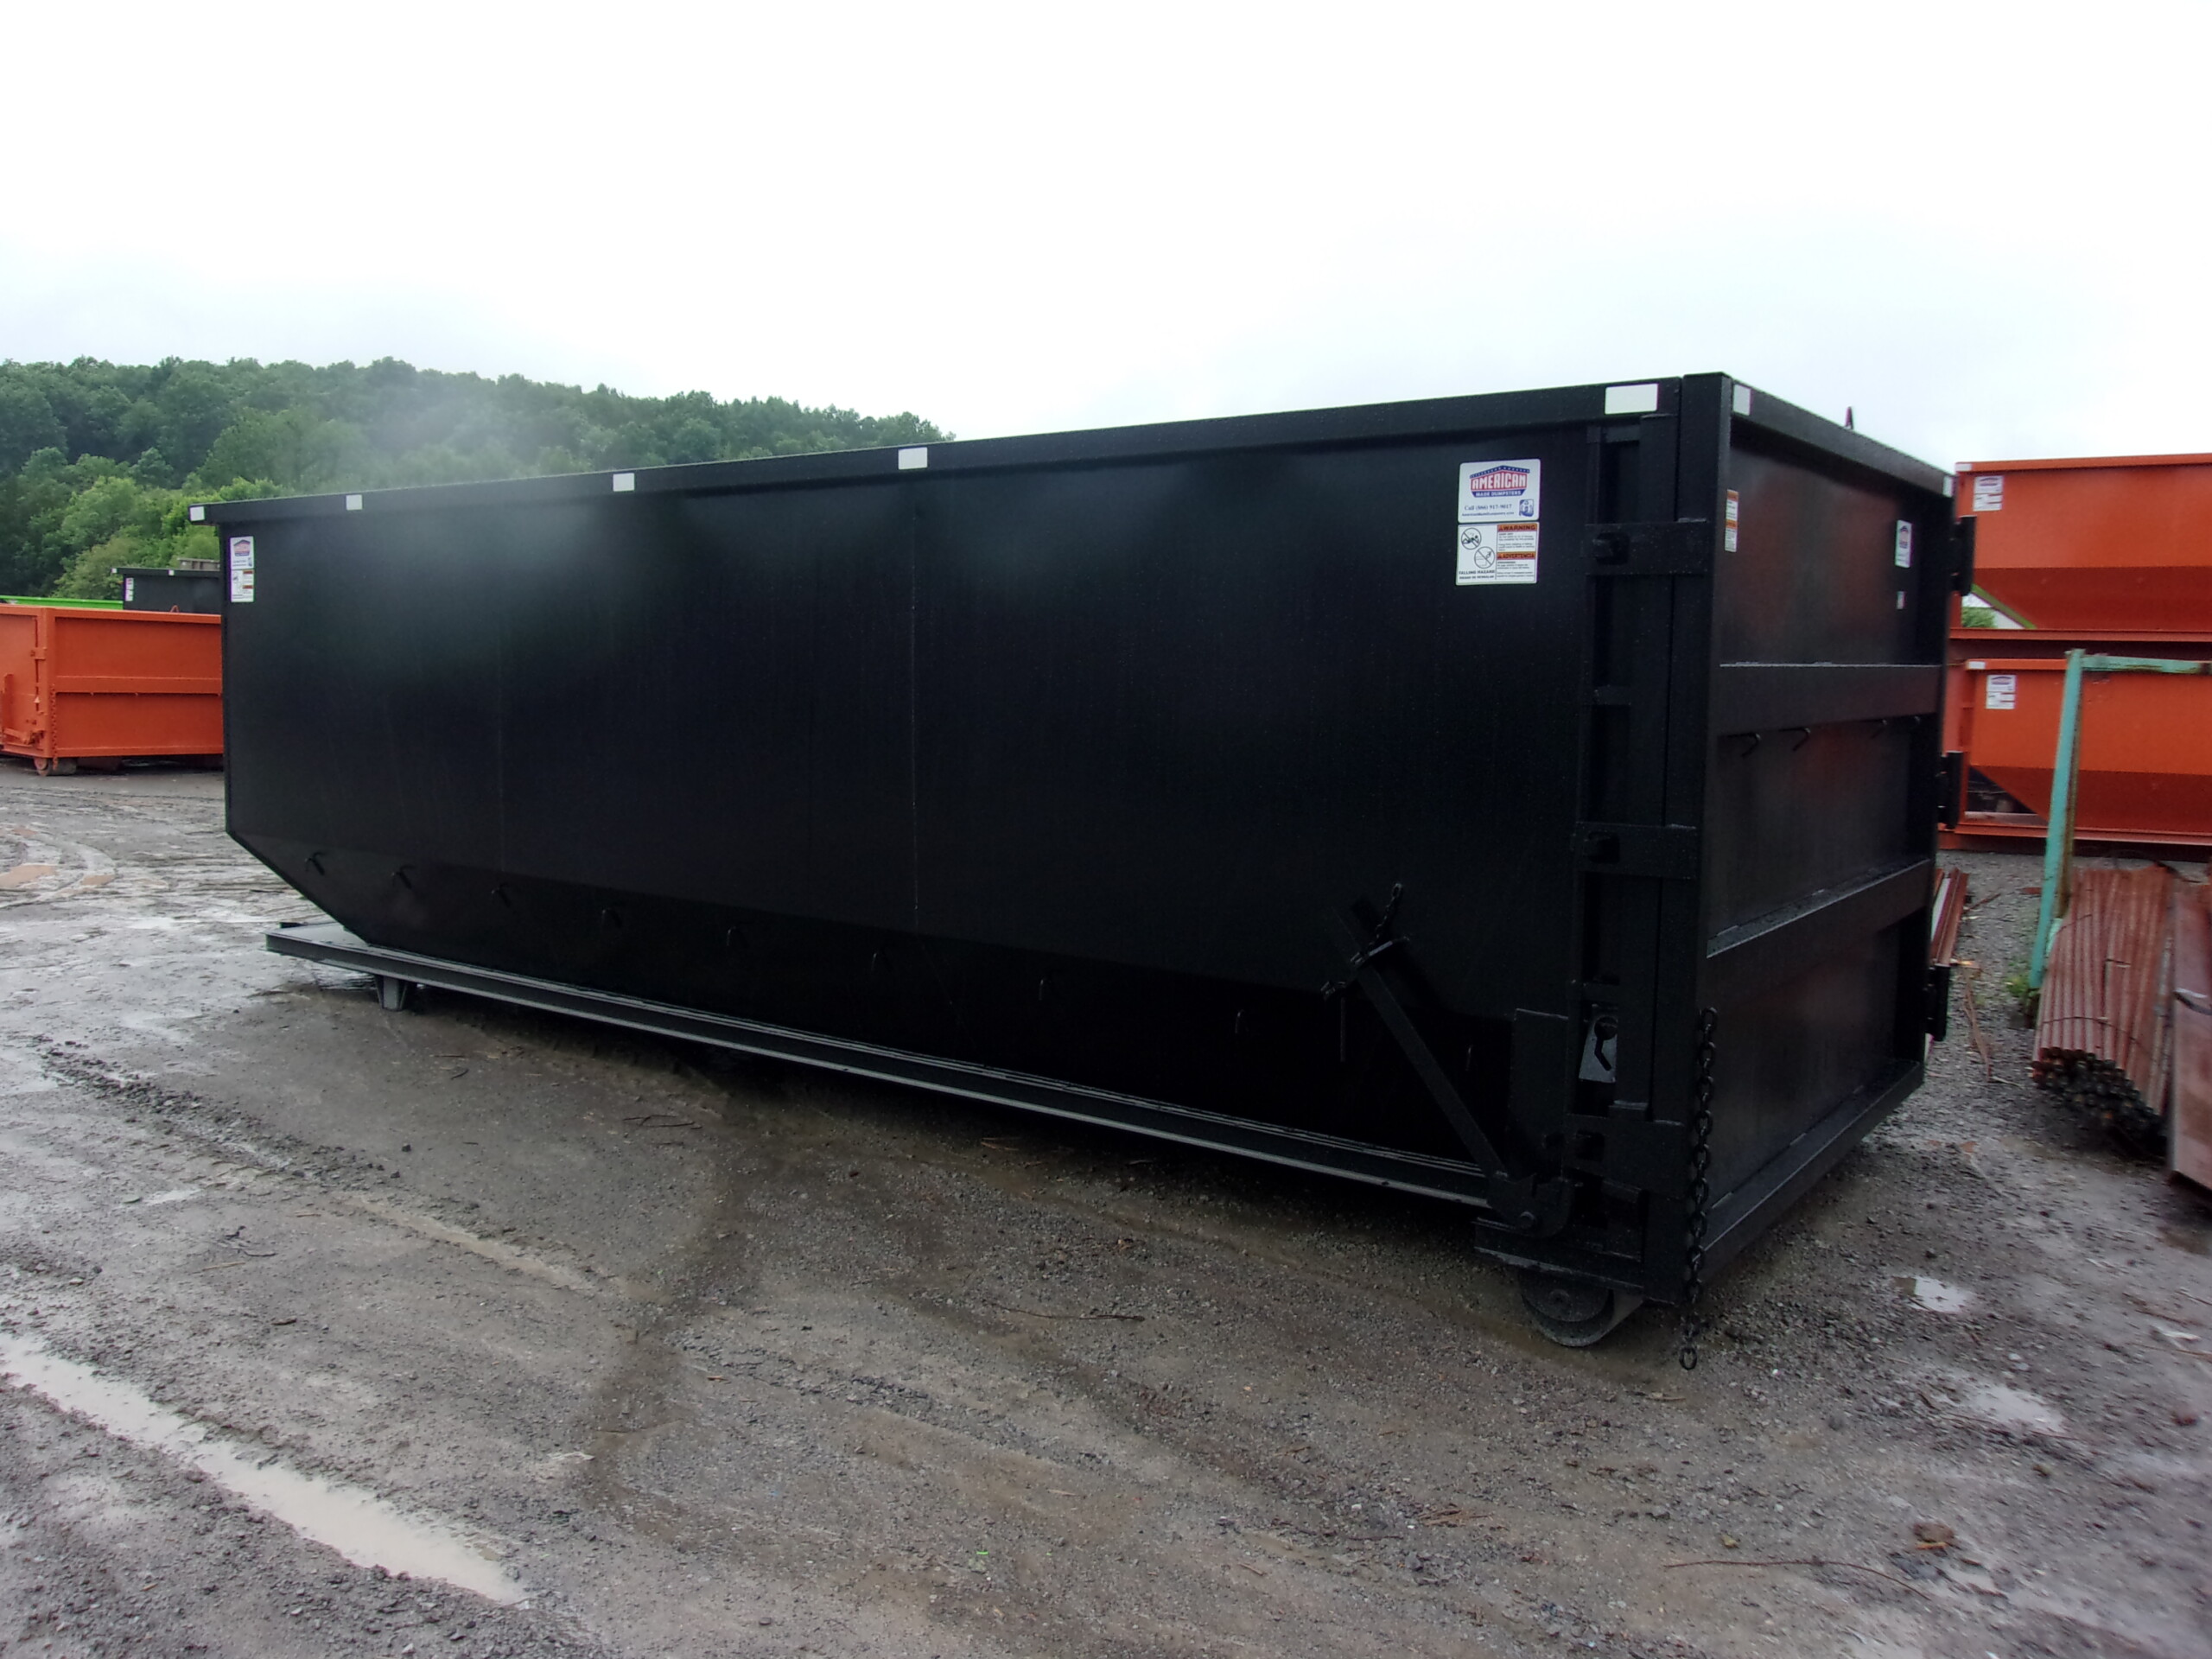 20 Yard Dumpster Liners ( 8'W x 4.5'H x 22'L) - Trans-Consolidated